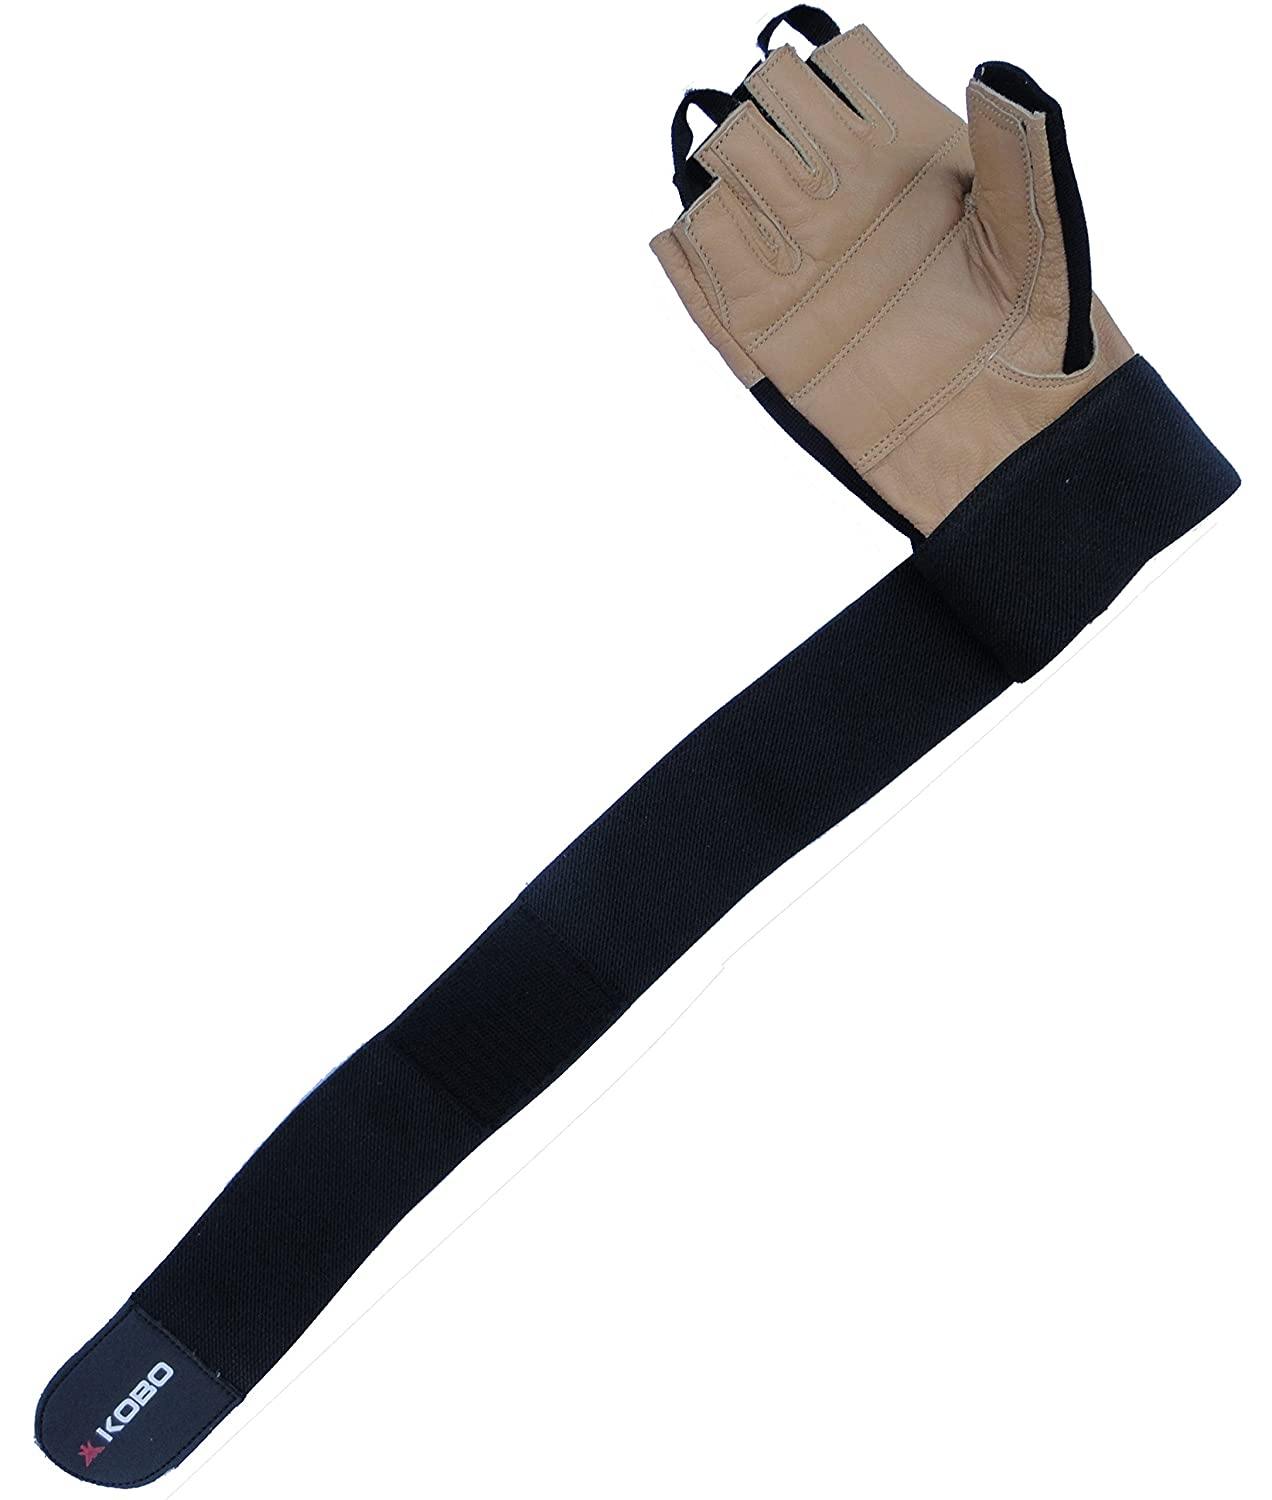 Leather Fitness Gloves/Weight Lifting Gloves/Gym Gloves Brown - Best Price online Prokicksports.com